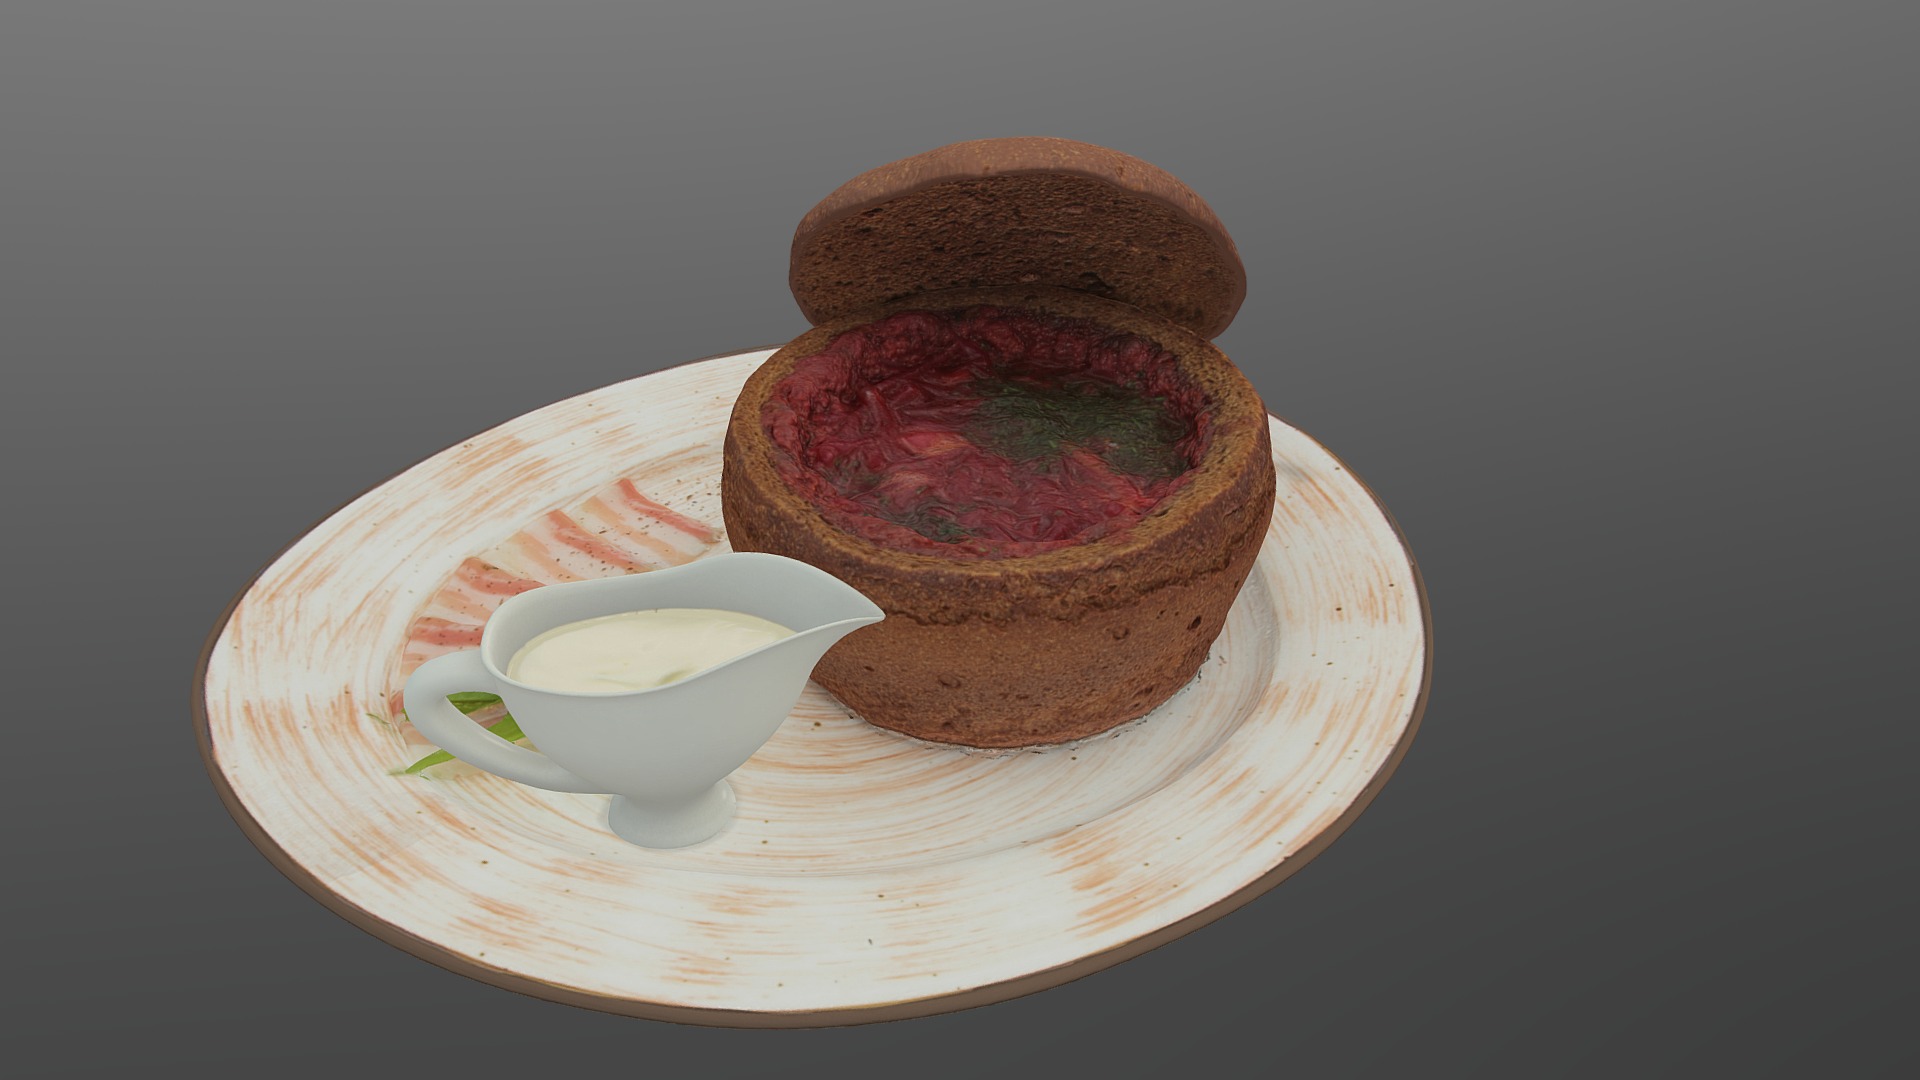 3D model 6Olimp - This is a 3D model of the 6Olimp. The 3D model is about a plate with food on it.